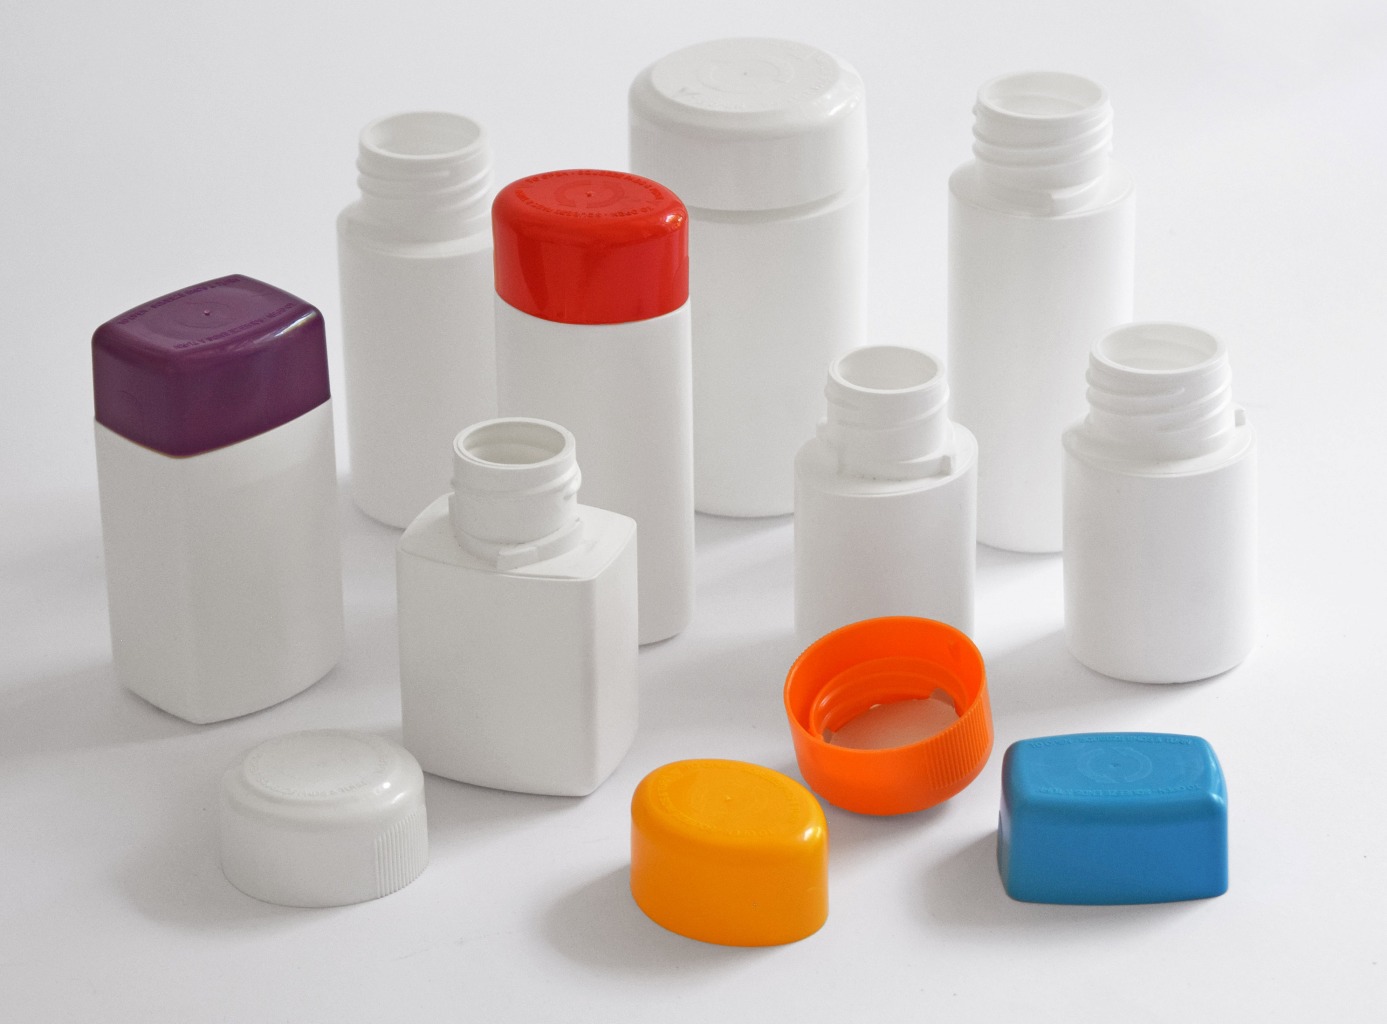 Childproof bottles and caps